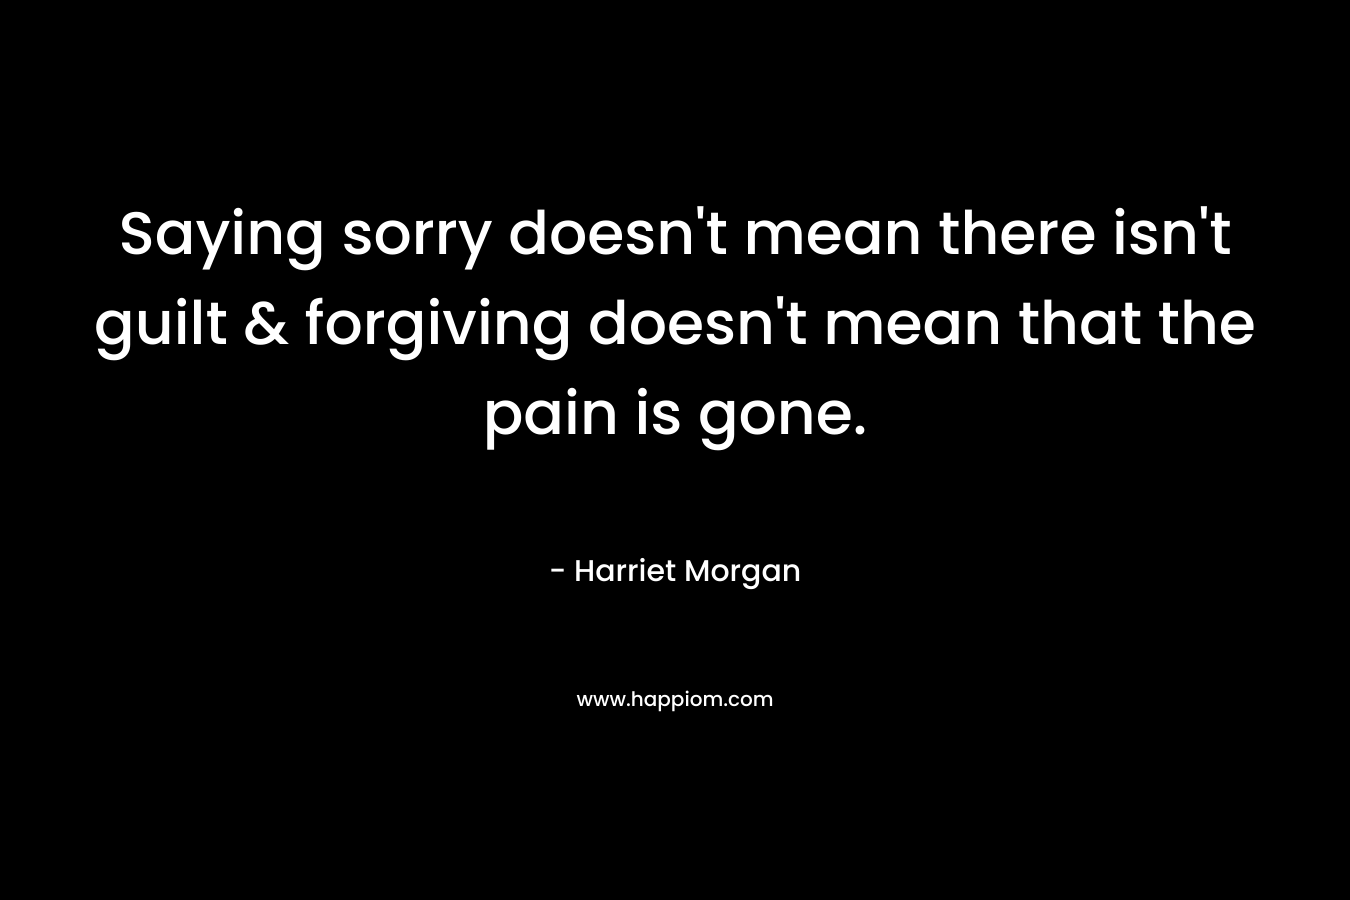 Saying sorry doesn't mean there isn't guilt & forgiving doesn't mean that the pain is gone.